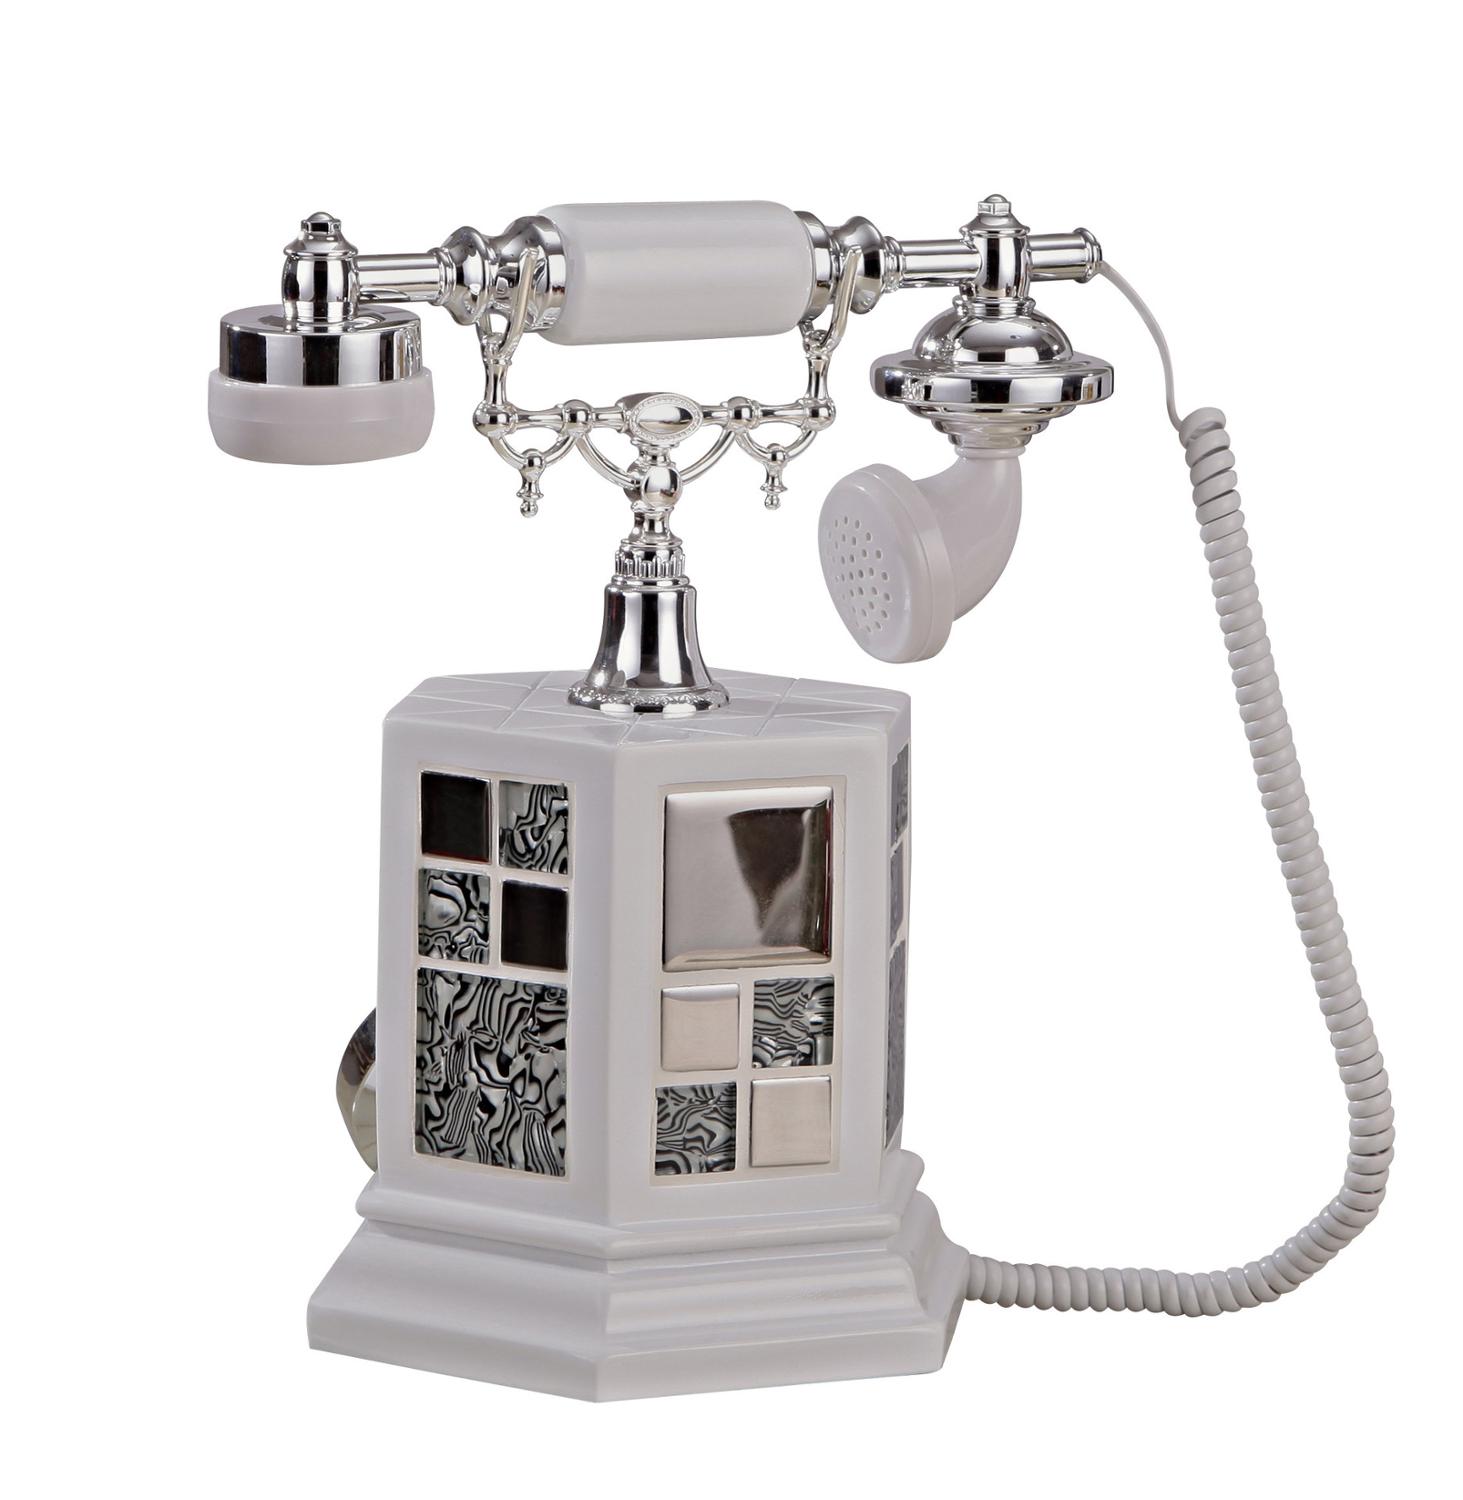 Rural telephone set back to the old telephone set of antique style ...